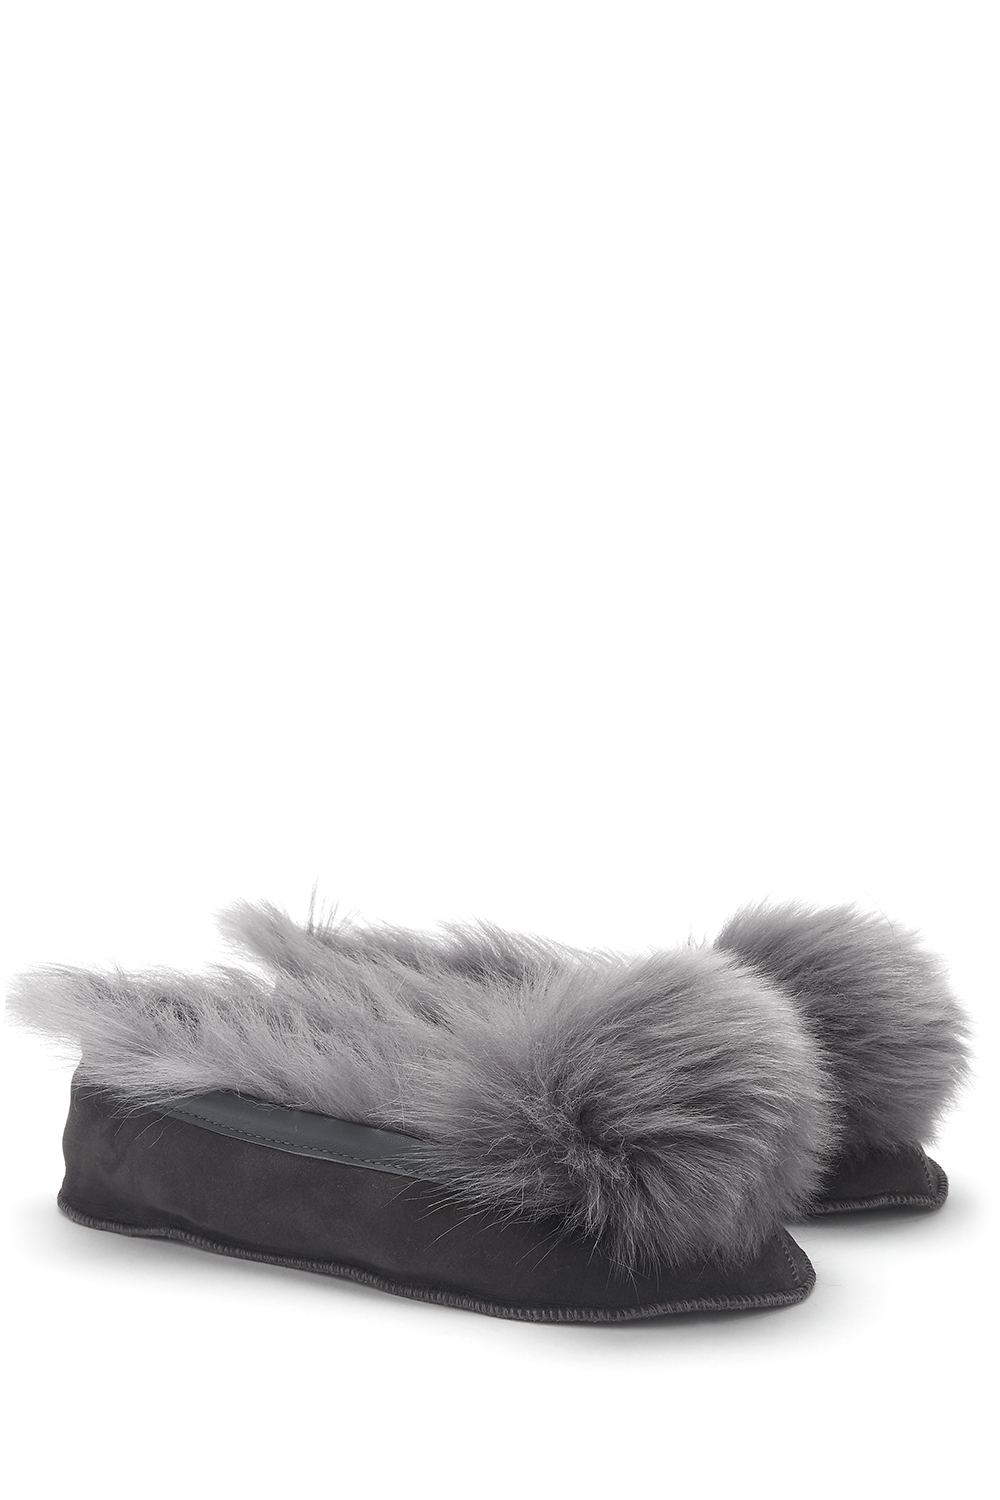 gushlow-and-cole-shearling-ballet-slippers-7-1